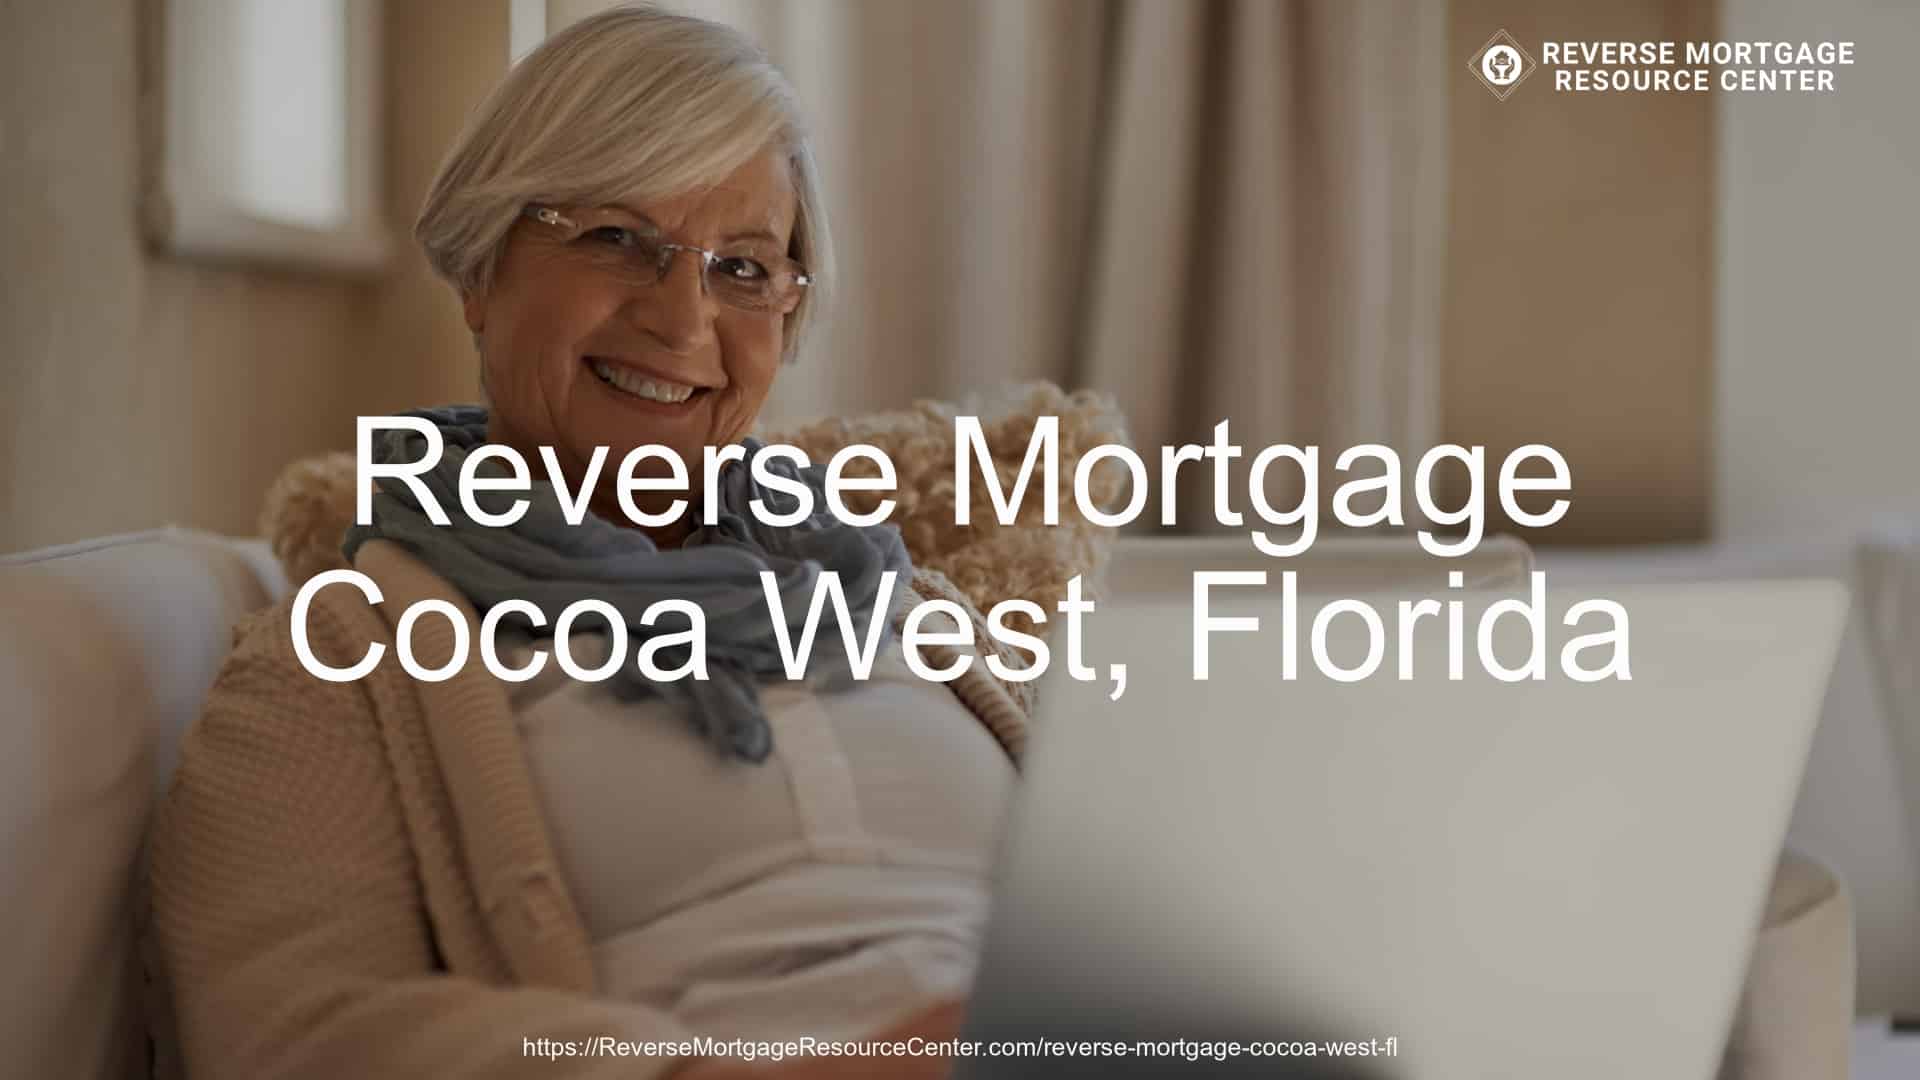 Reverse Mortgage Loans in Cocoa West Florida